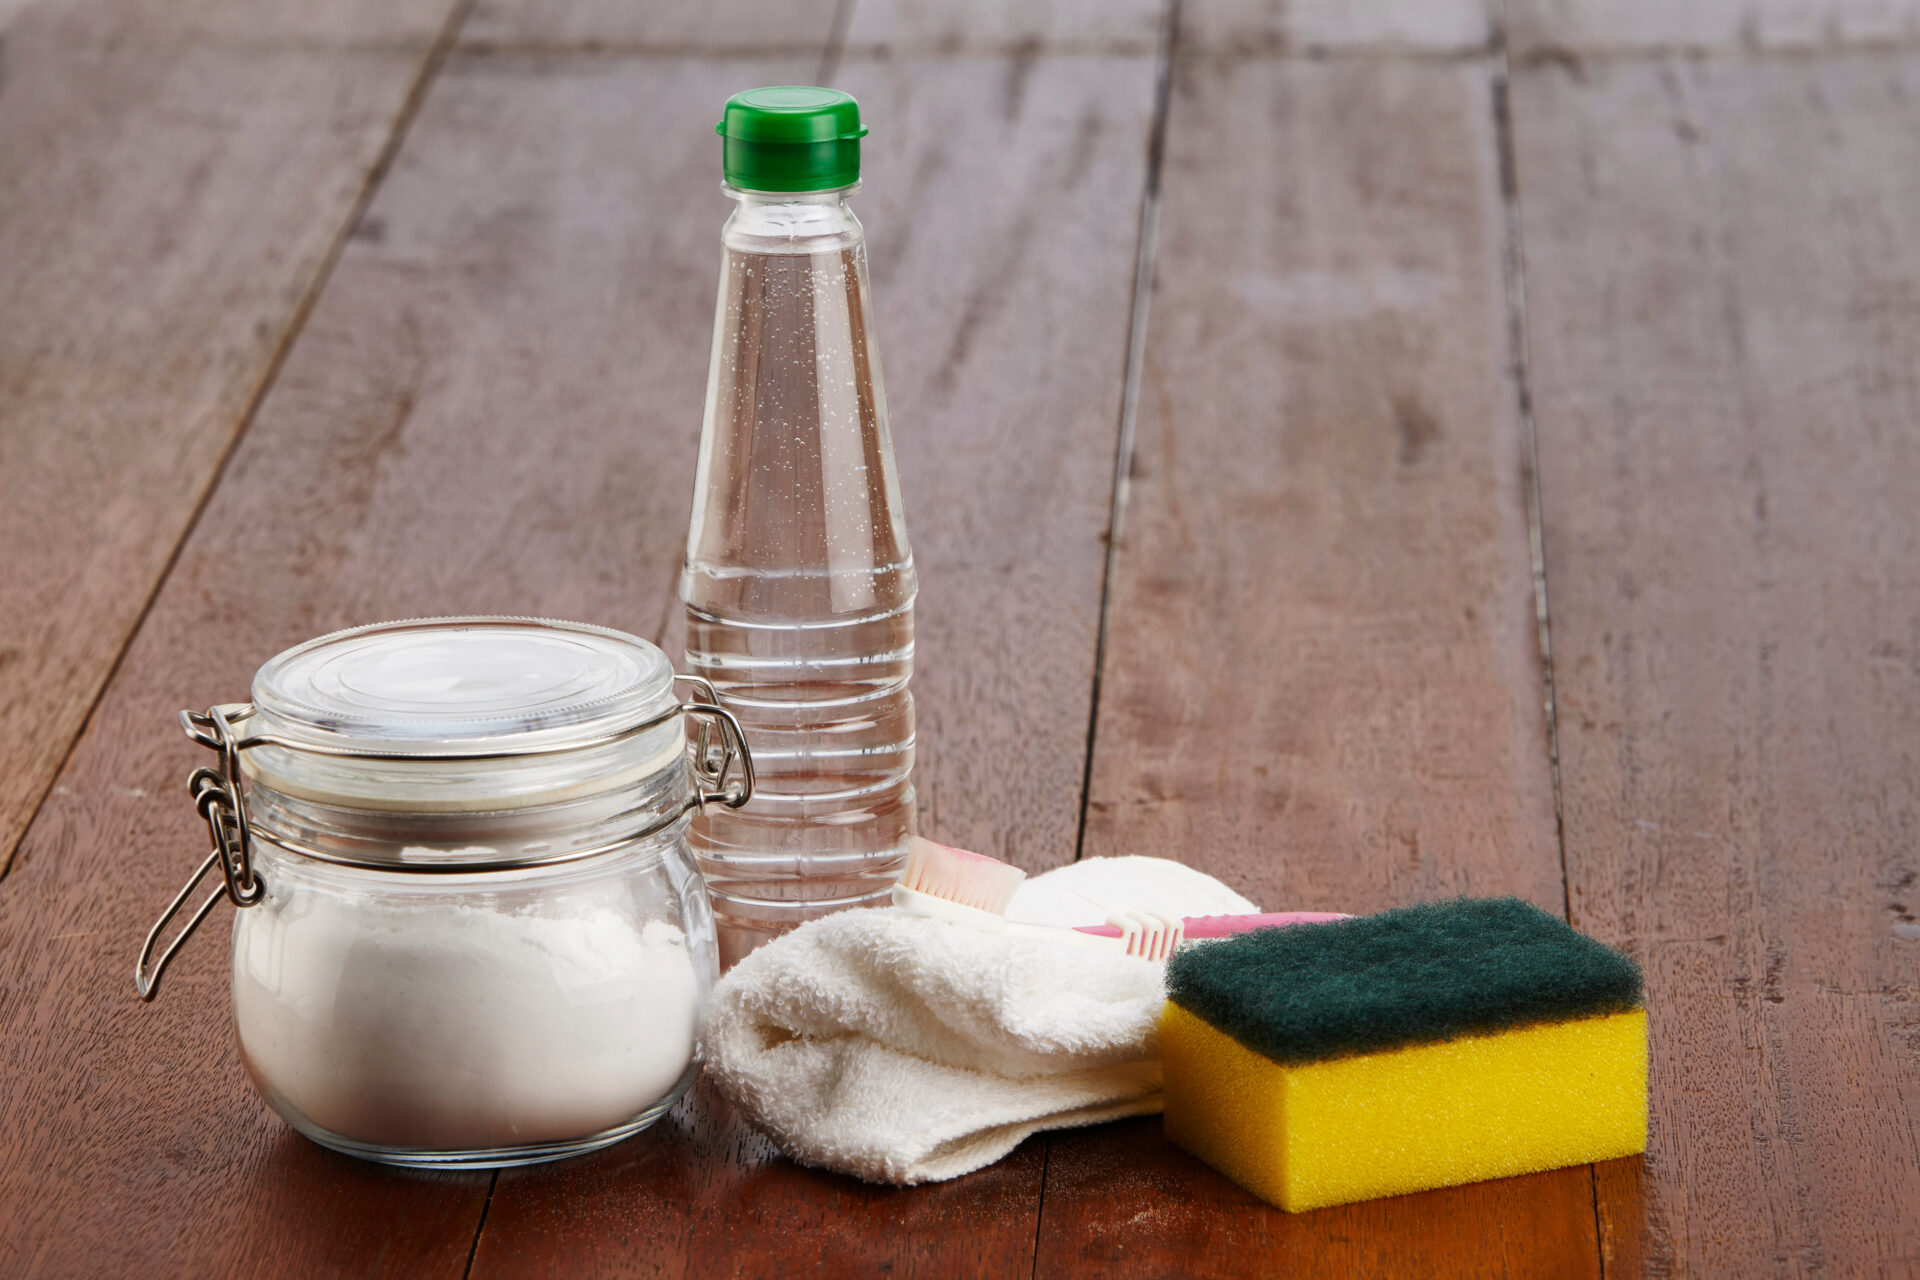 Household assortment of environmentally friendly cleaning supplies including baking soda, vinegar, a toothbrush, sponge, and a rag.